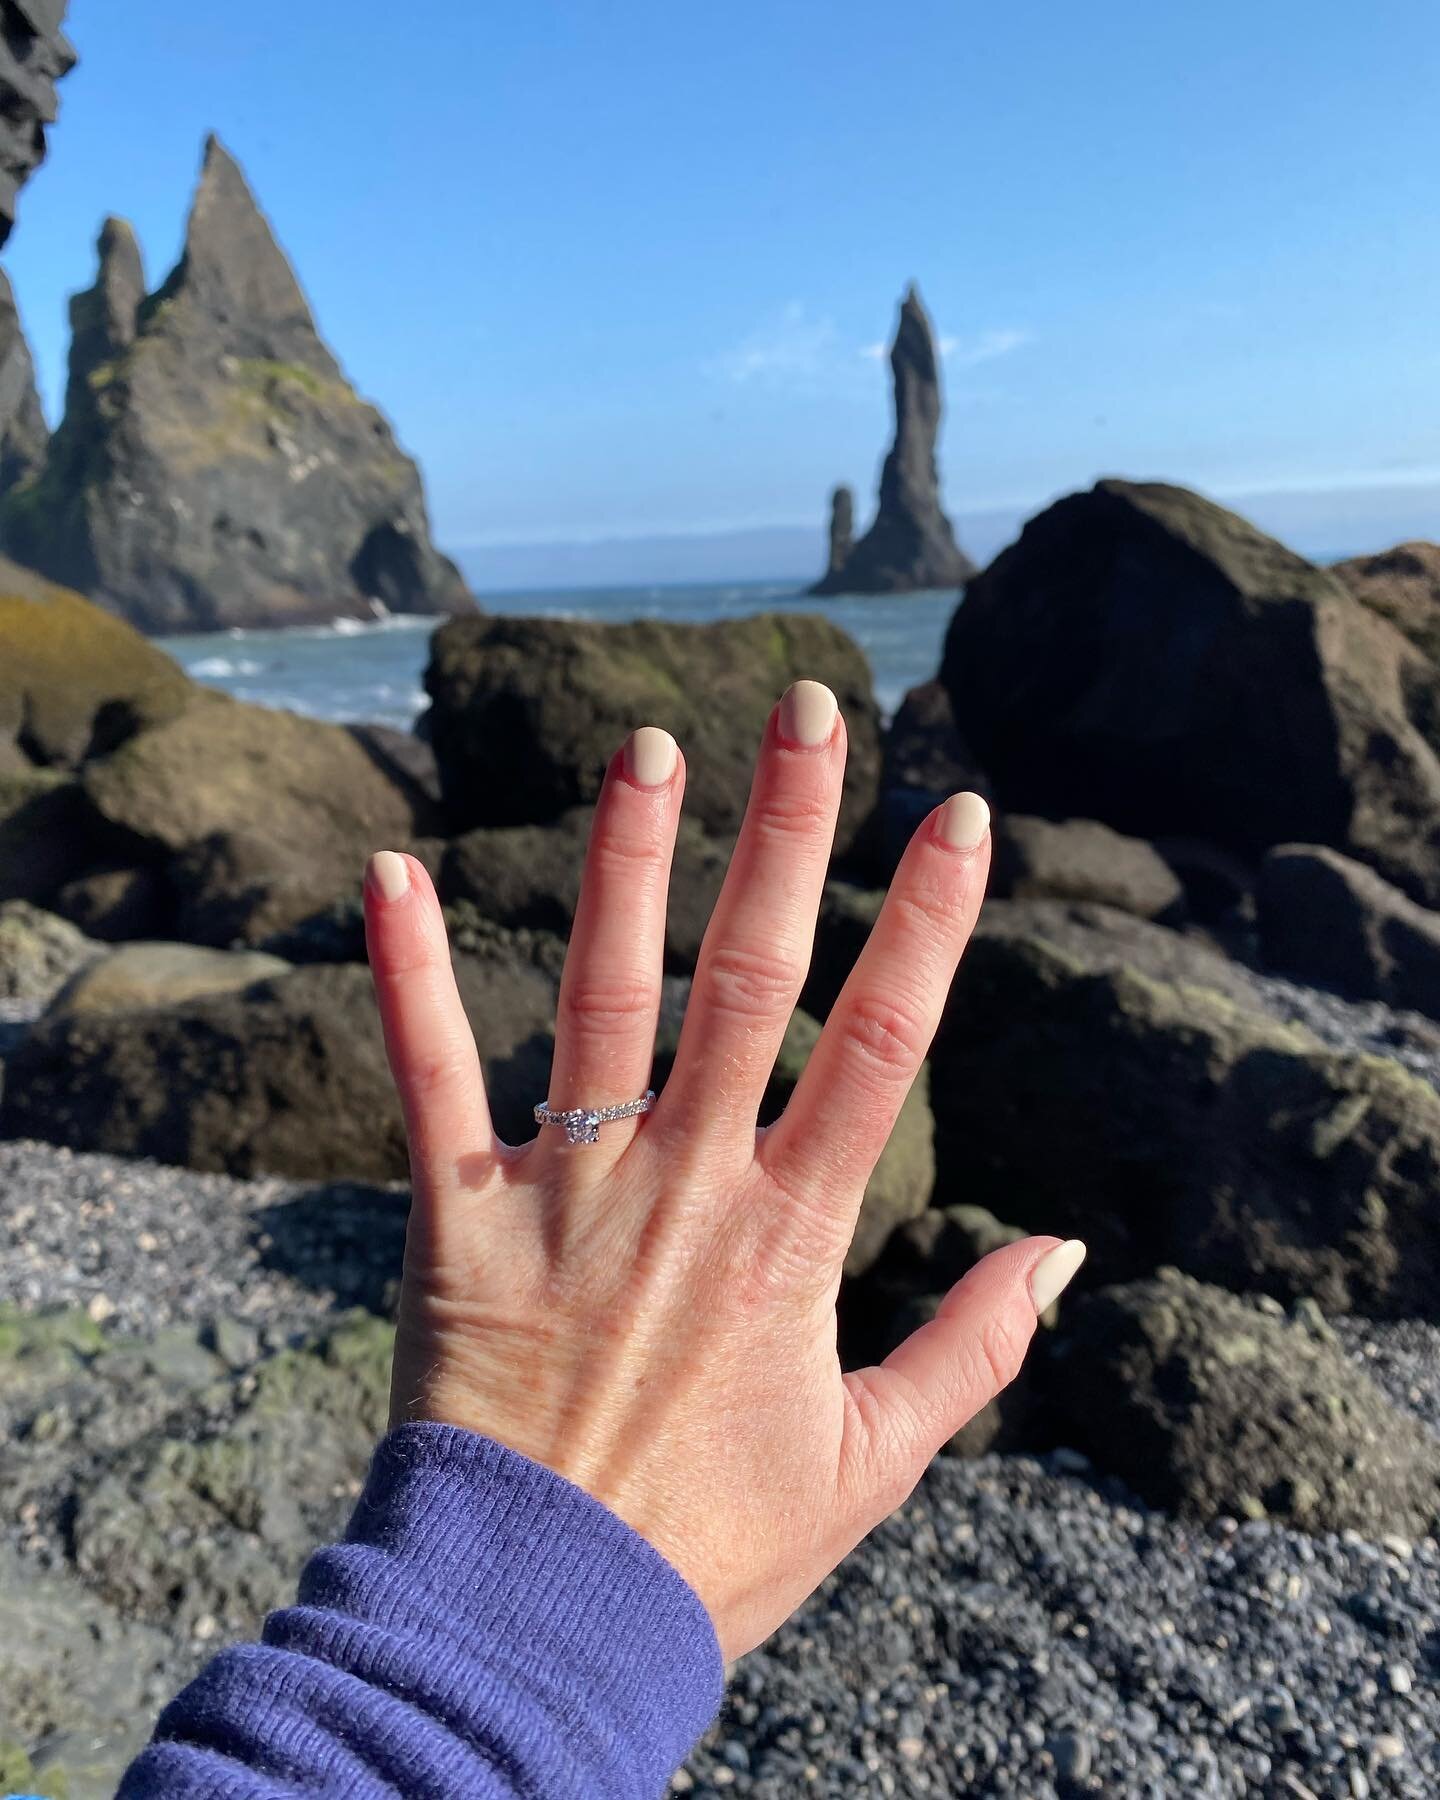 We got engaged in Iceland! Literally blown away (swipe for windy photo). #cheers #sk&aacute;l